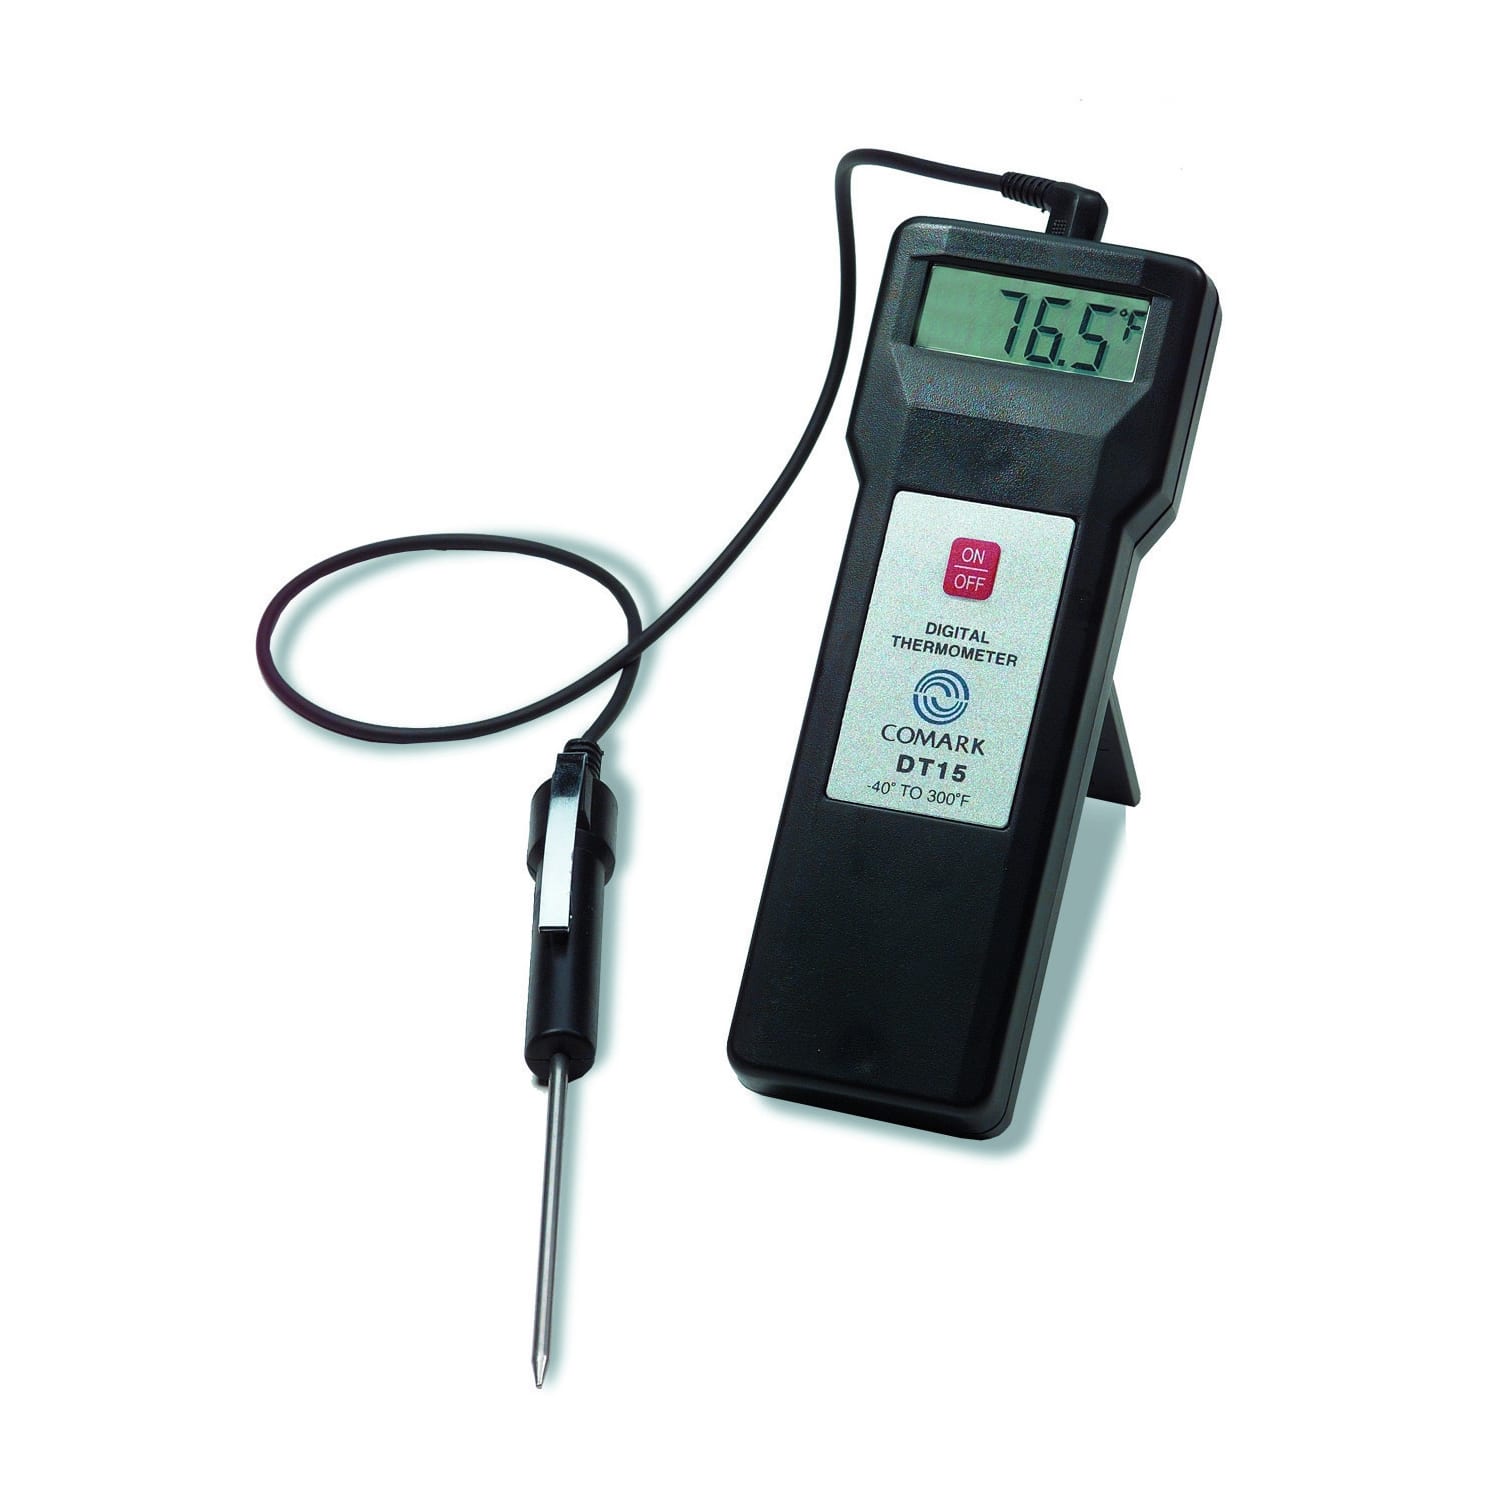 Comark DT15 Economical Thermistor Food Thermometer